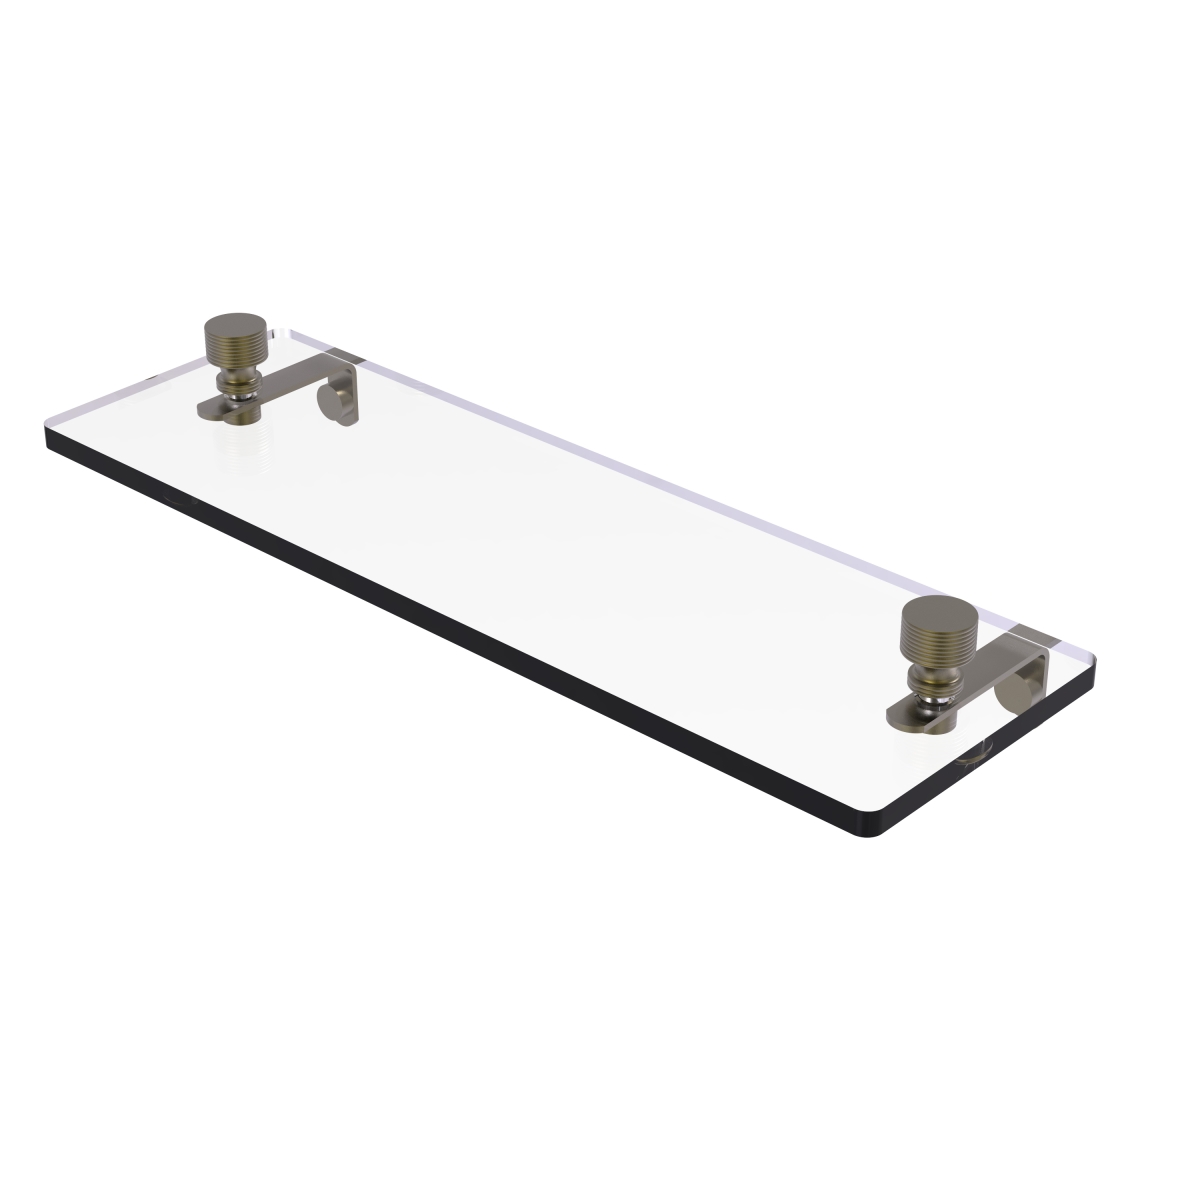 Picture of Allied Brass FT-1-16-ABR 16 in. Foxtrot Glass Vanity Shelf with Beveled Edges&#44; Antique Brass